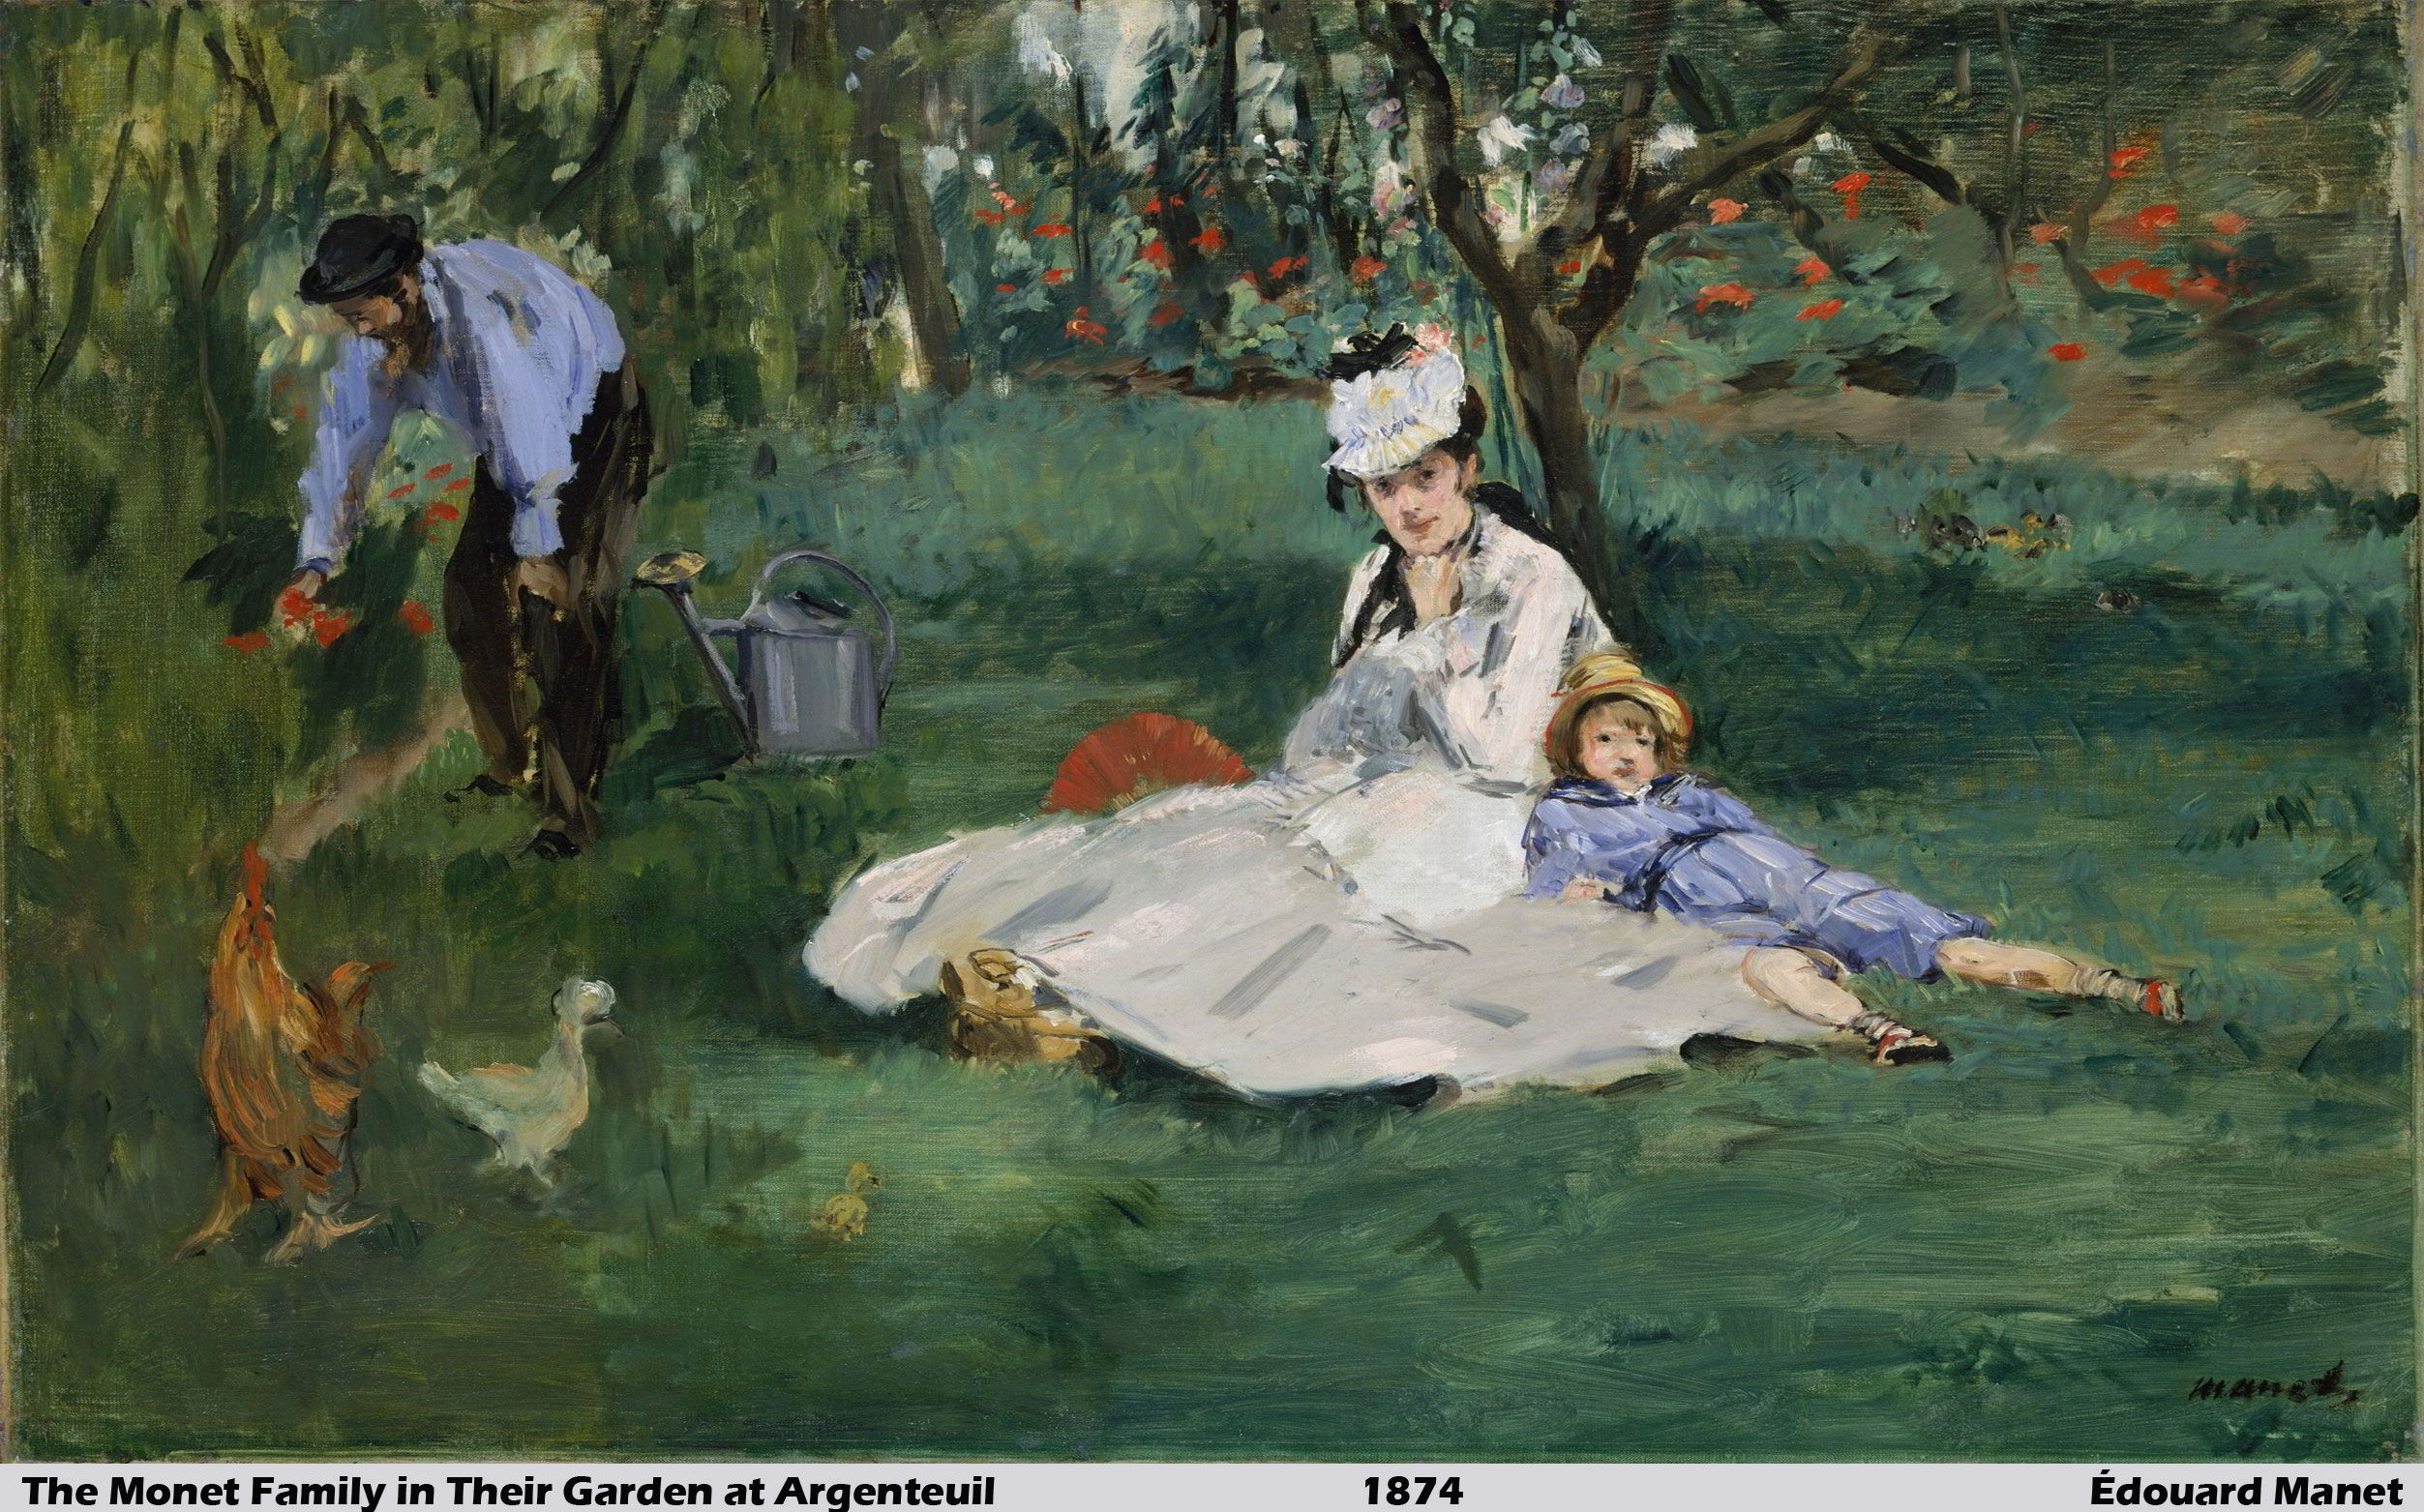 The Monet Family in Their Garden at Argenteuil by Édouard Manet